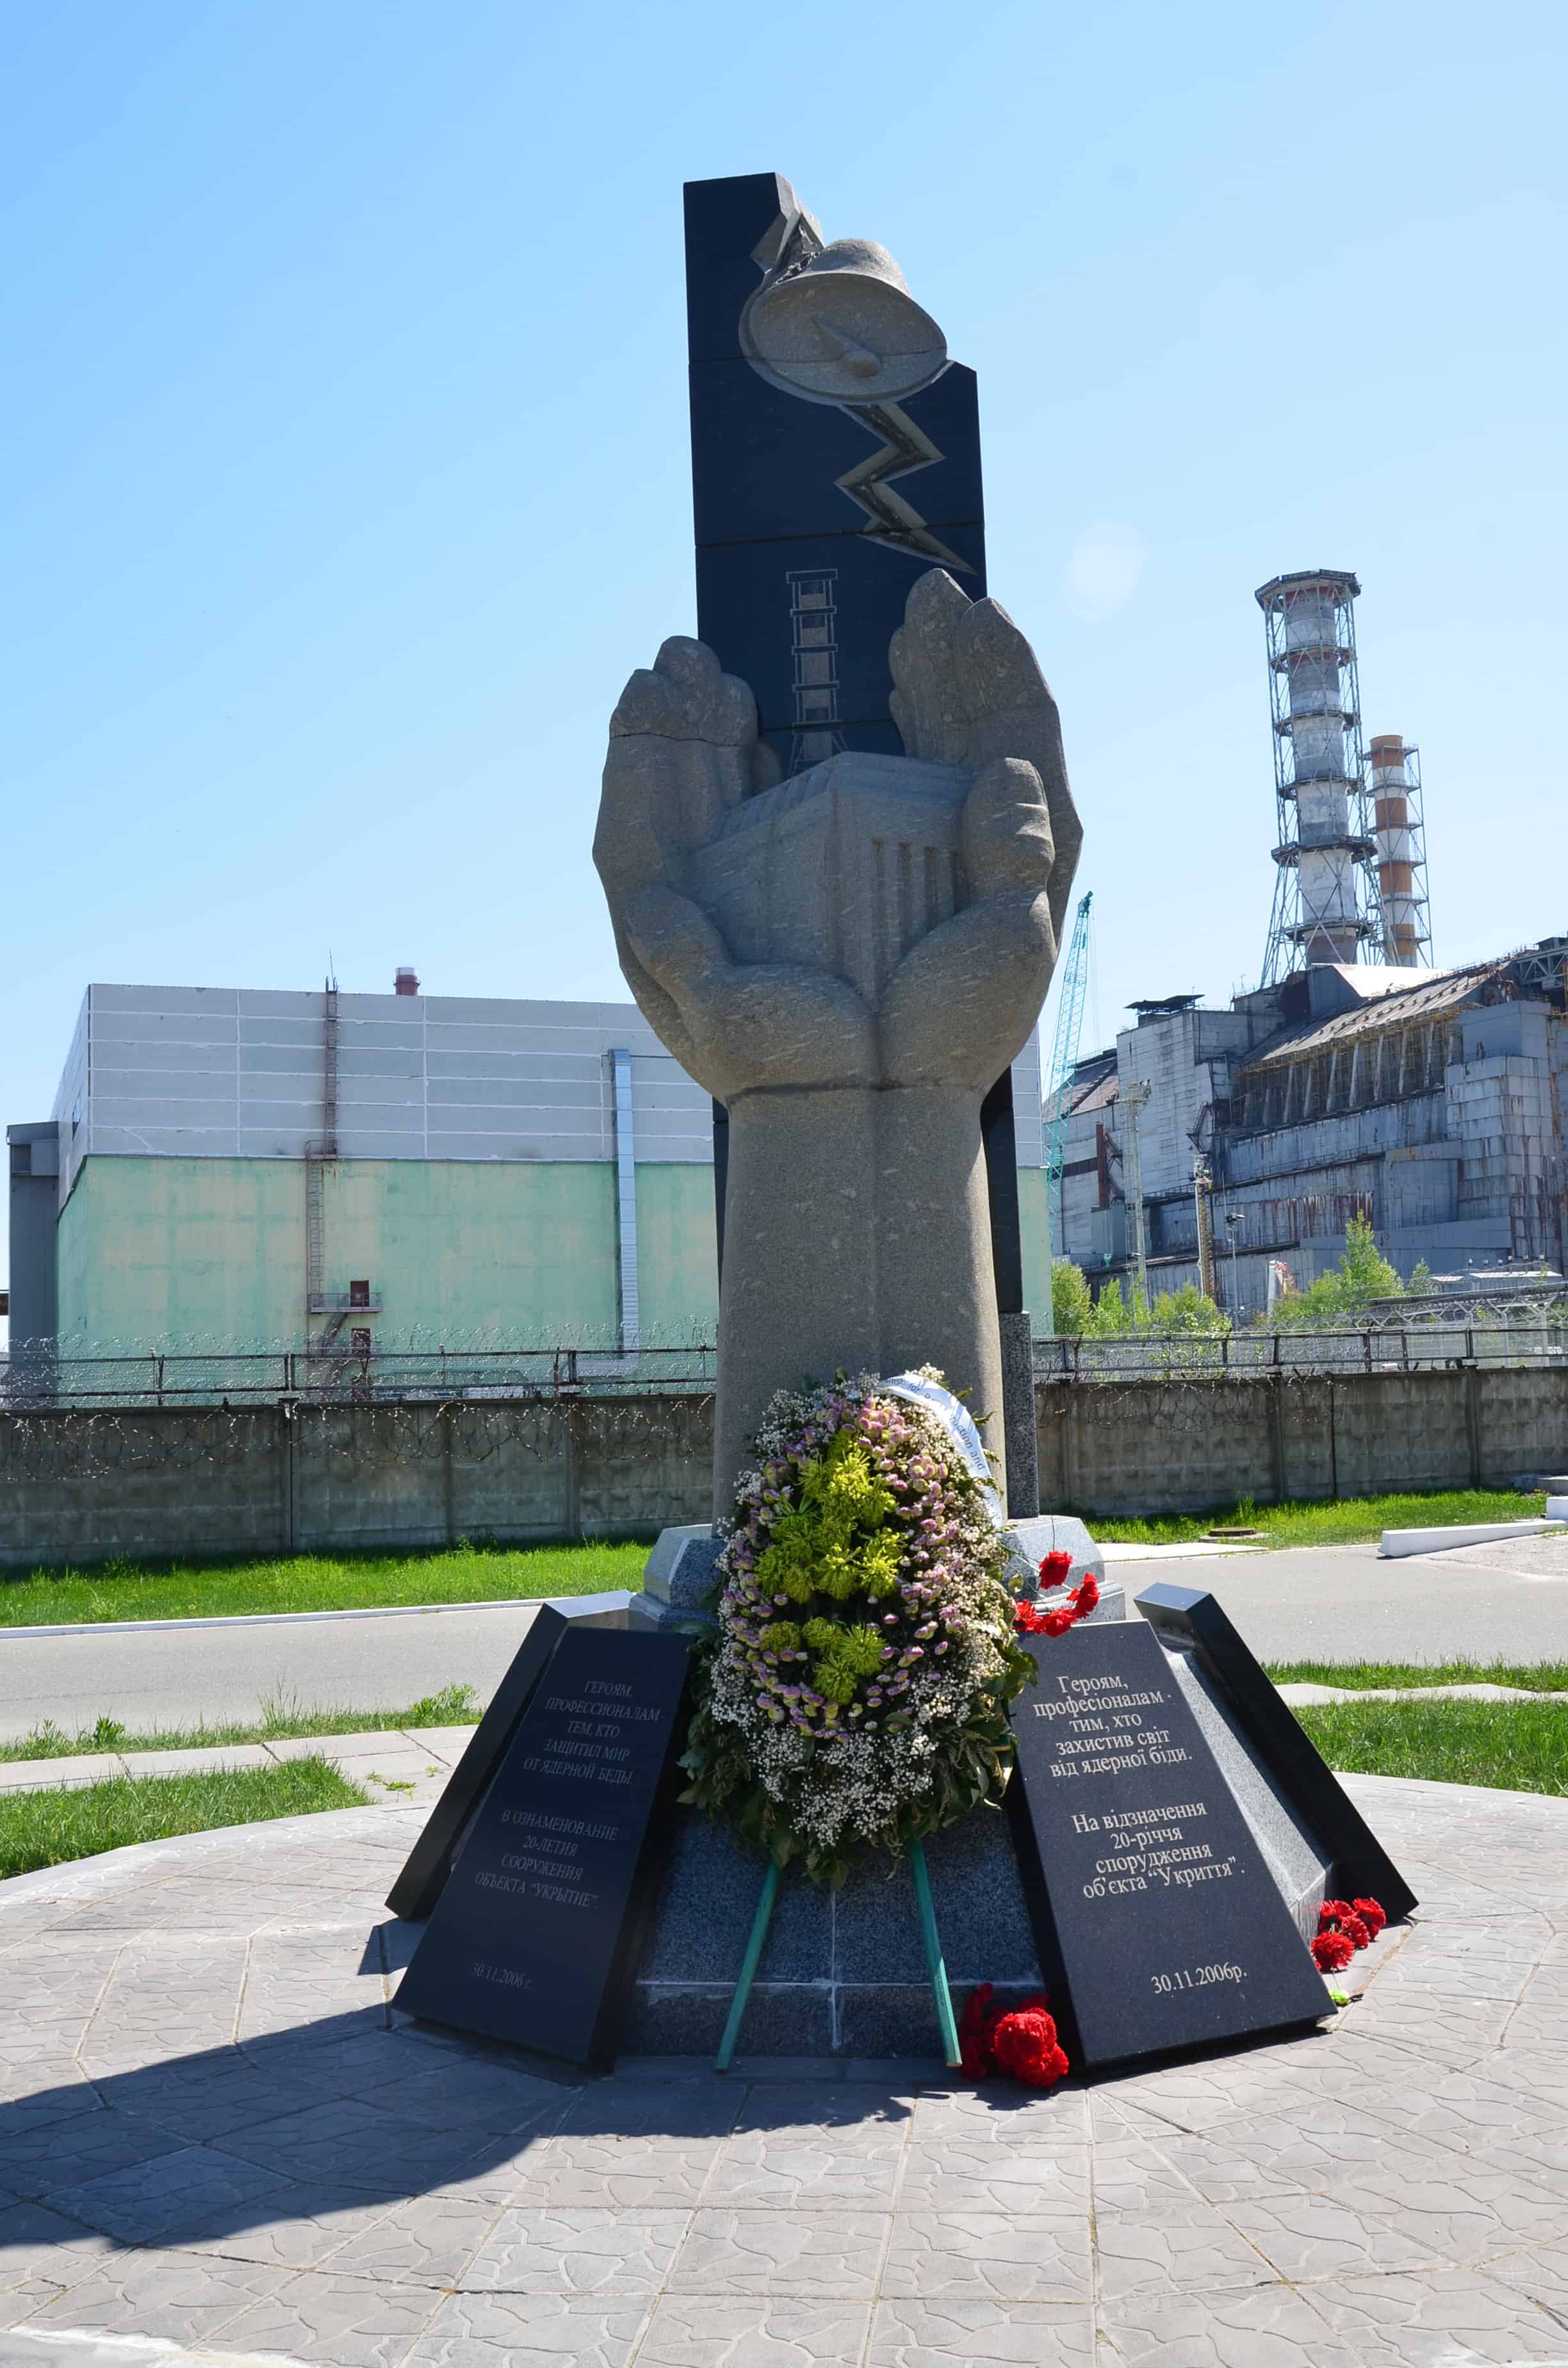 Memorial to the workers who "saved the world" at Chernobyl Nuclear Power Plant in Chernobyl Exclusion Zone, Ukraine